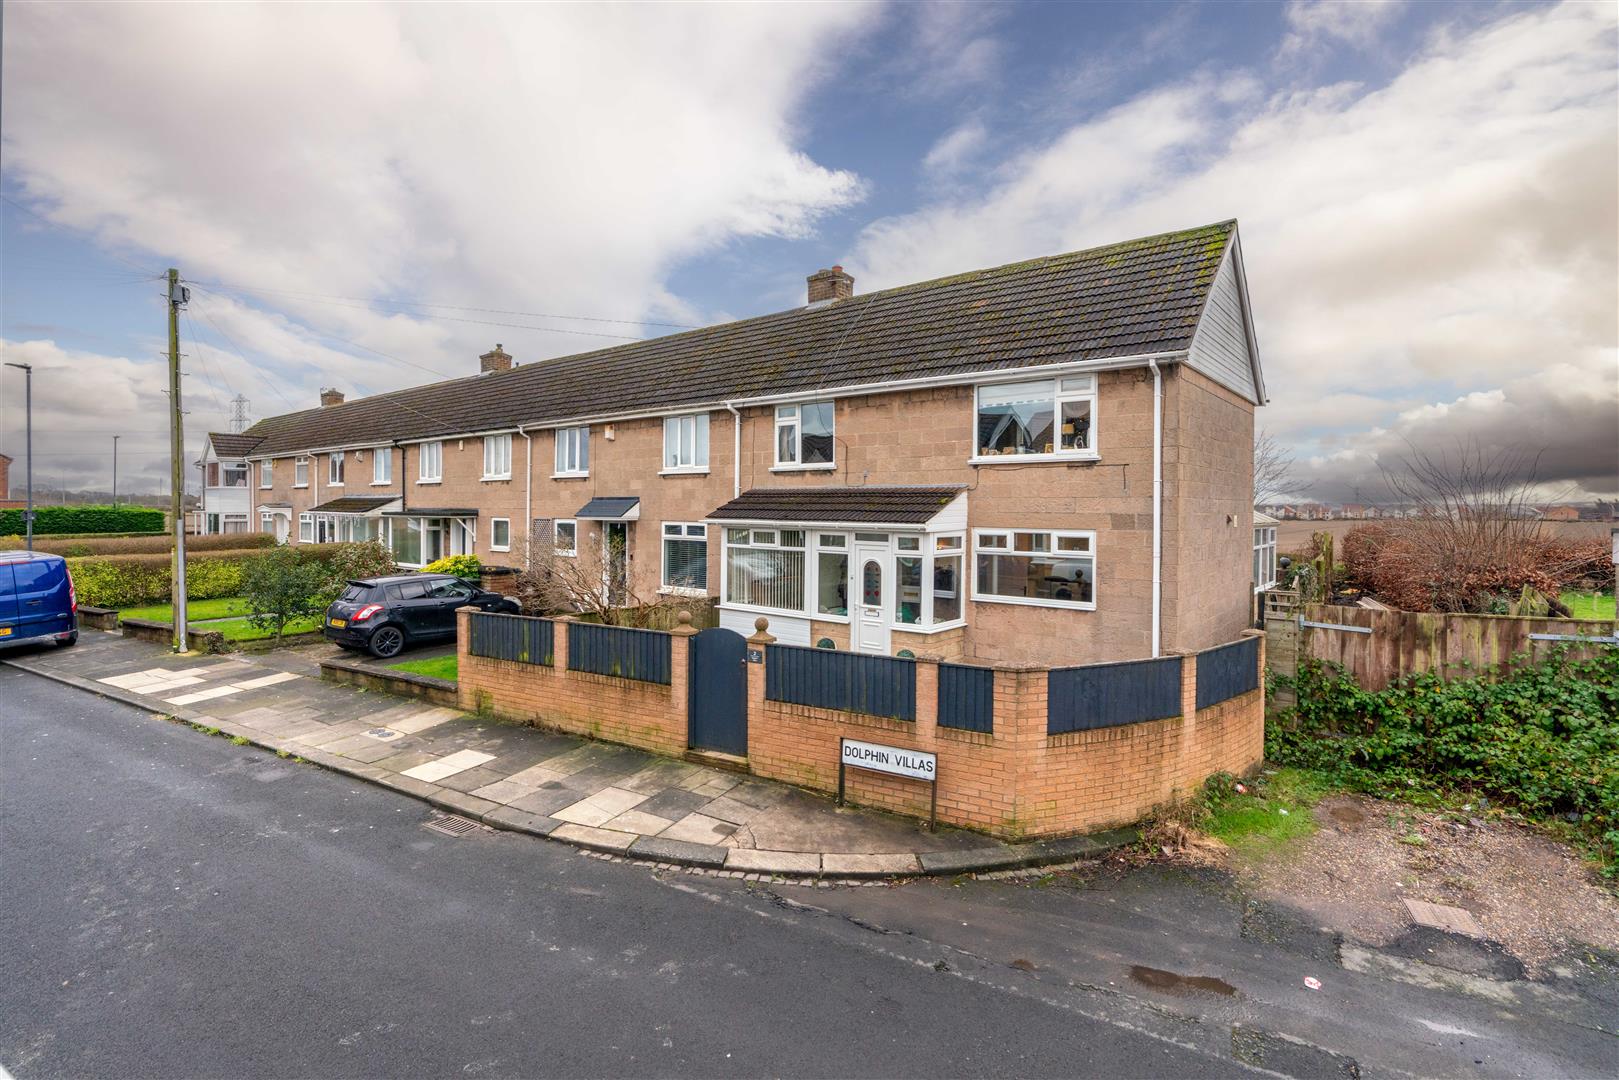 3 bed end of terrace house for sale in Dolphin Villas, Hazlerigg, NE13